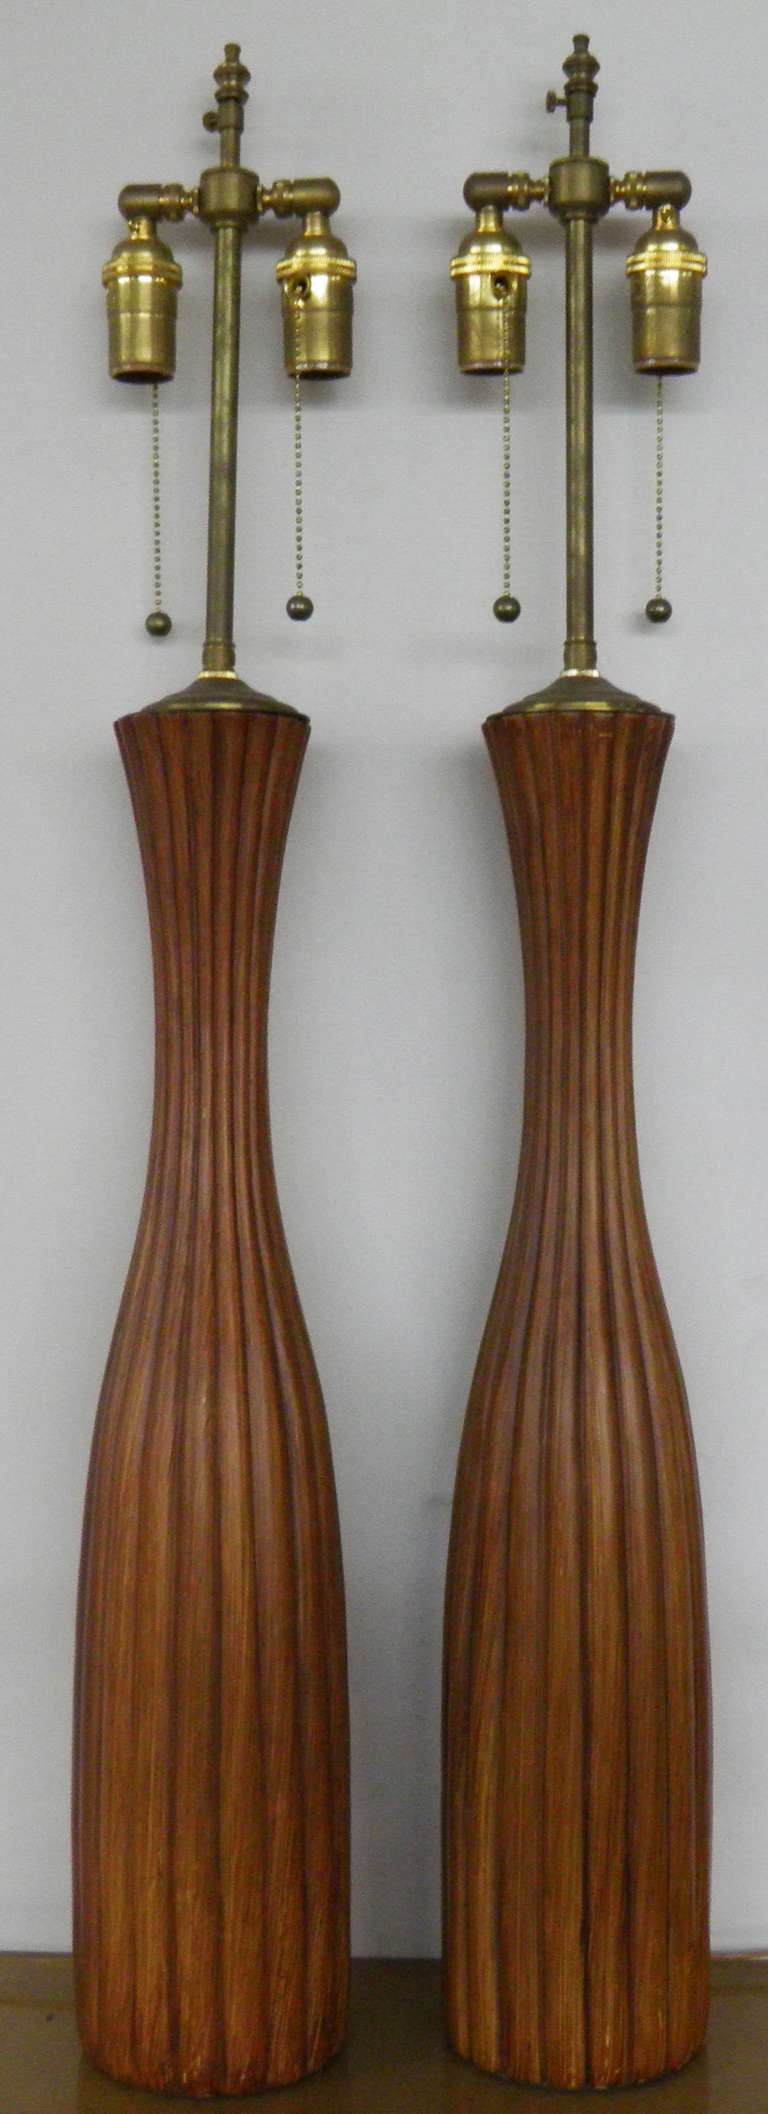 Tall pair of ceramic, faux-wood scored wood vases with lamp application.  The hardware is brushed Brass.  The dual sockets are individually controlled.  The finial post extends an additional three: if desired.

25 5/8